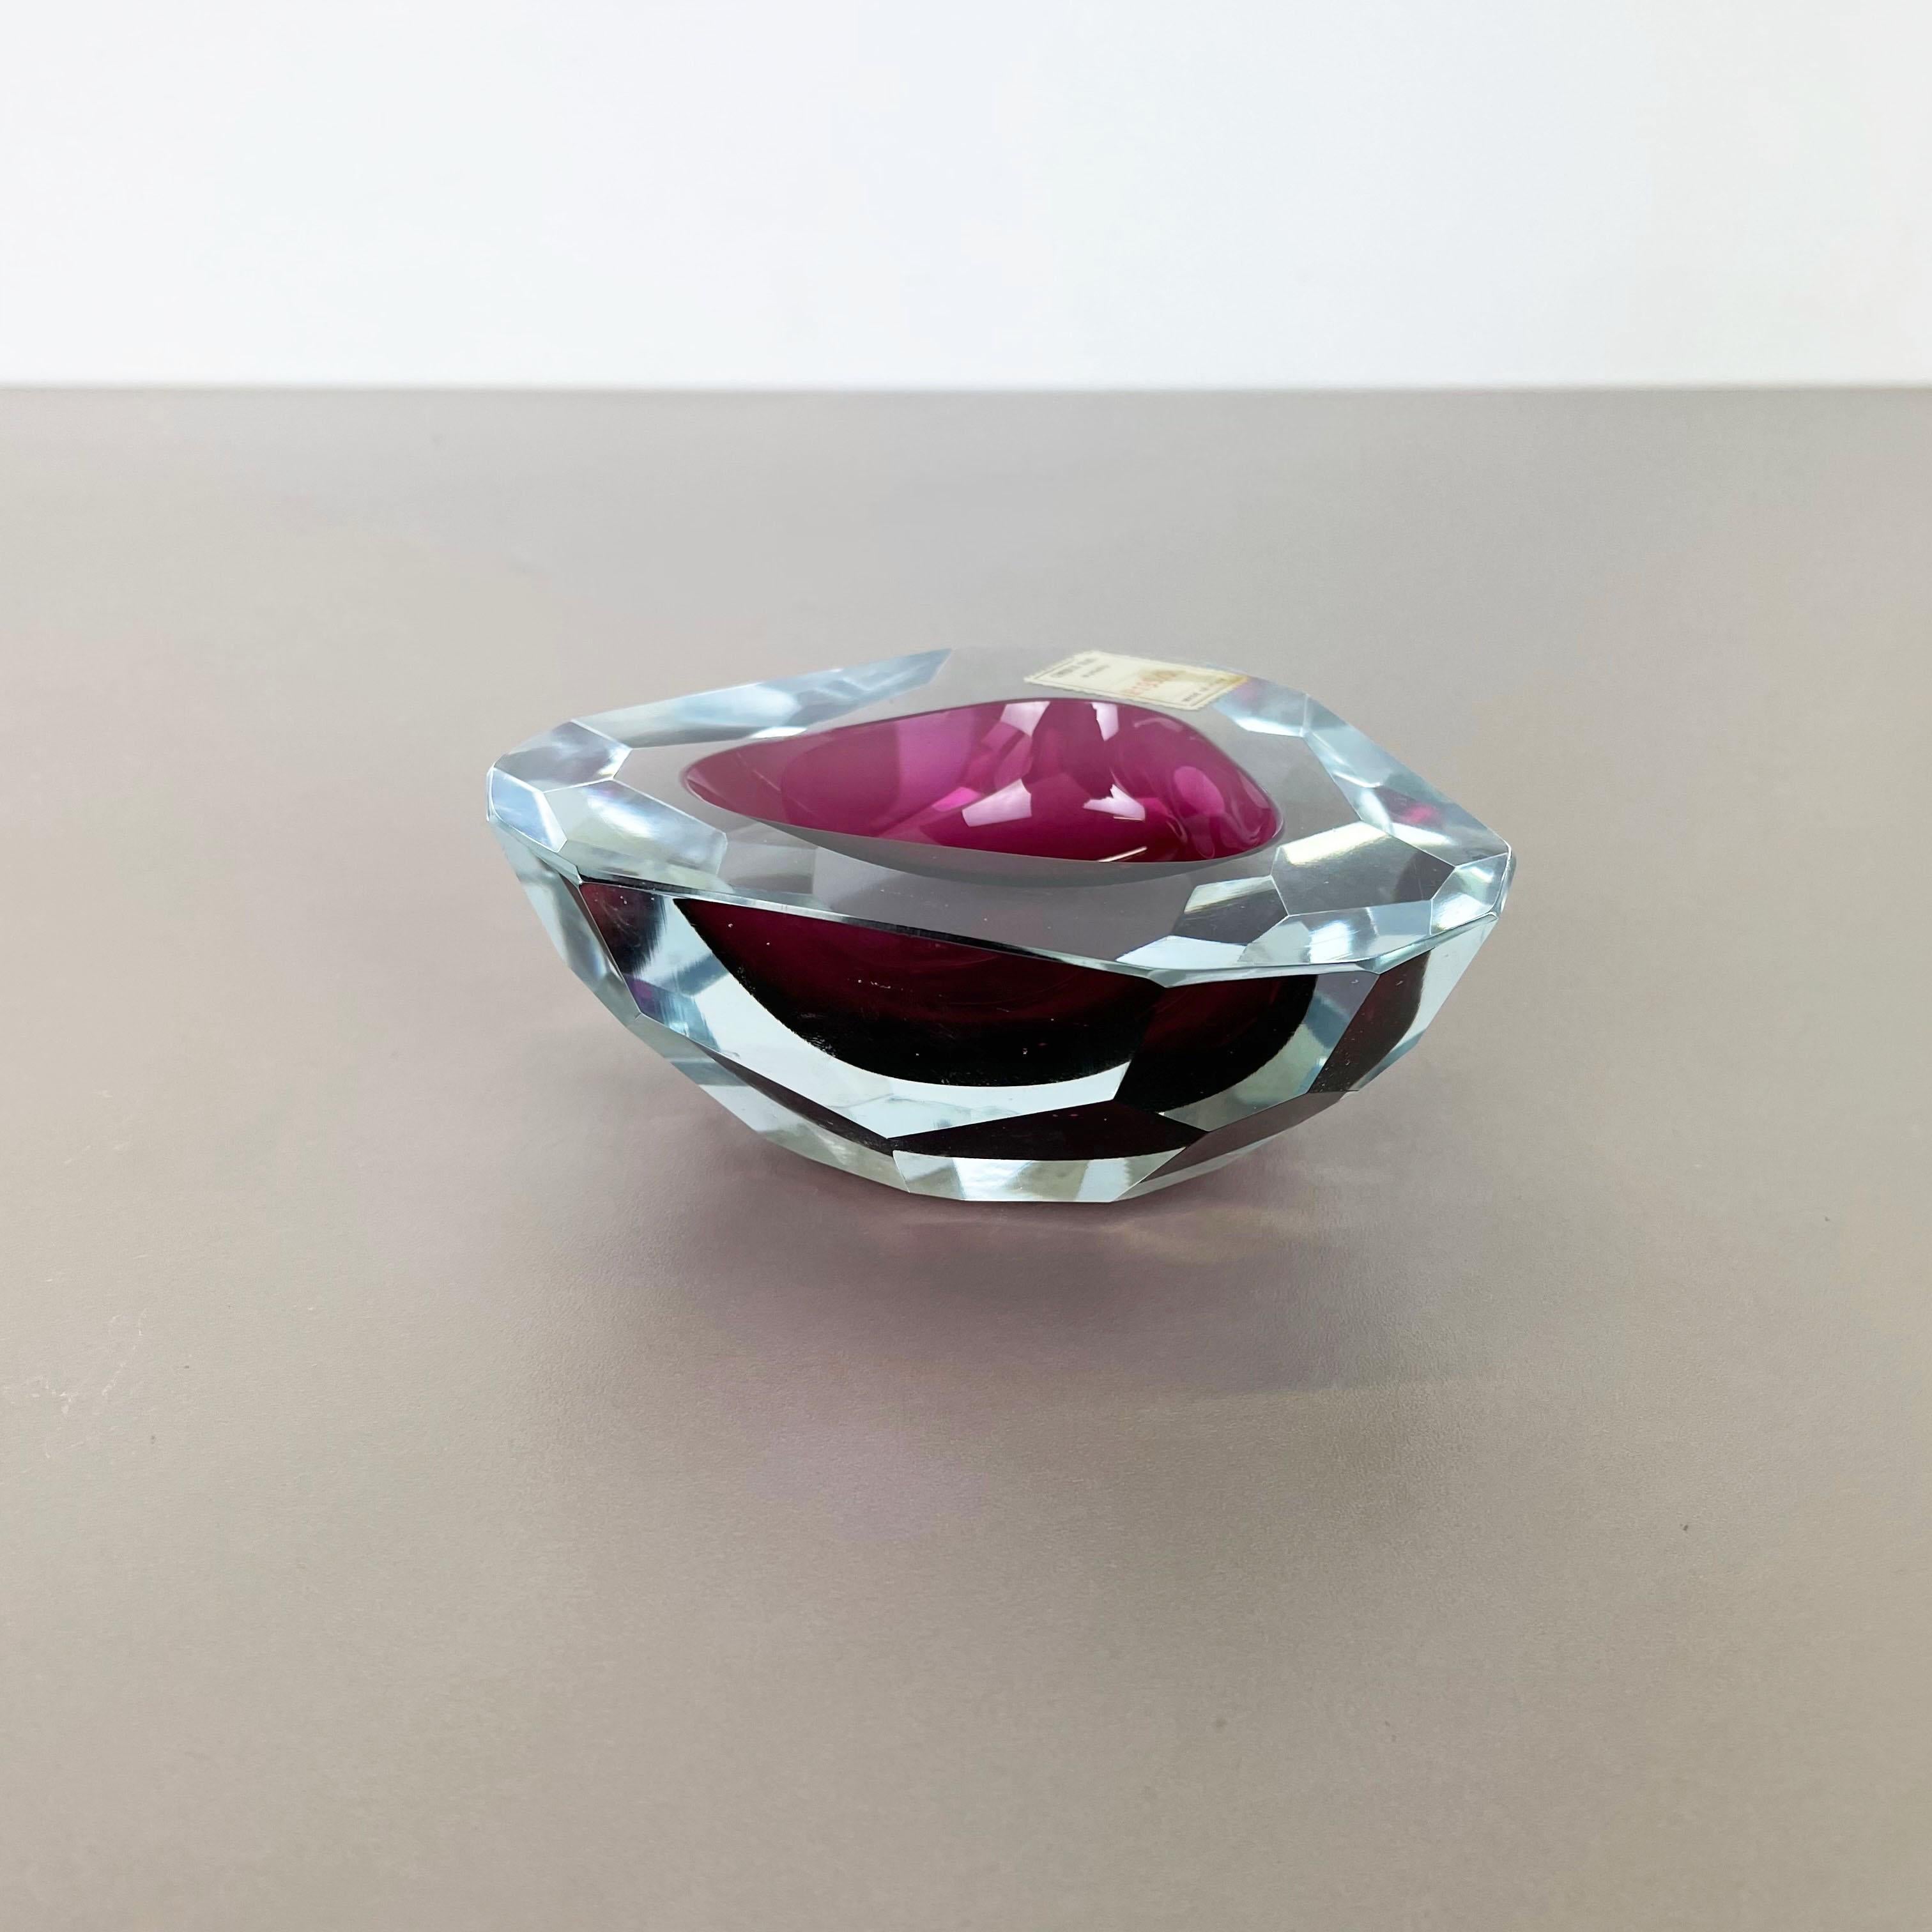 Mid-Century Modern Large Murano Glass Faceted Sommerso Bowl Ashtray by Cenedese, Murano Italy 1970s